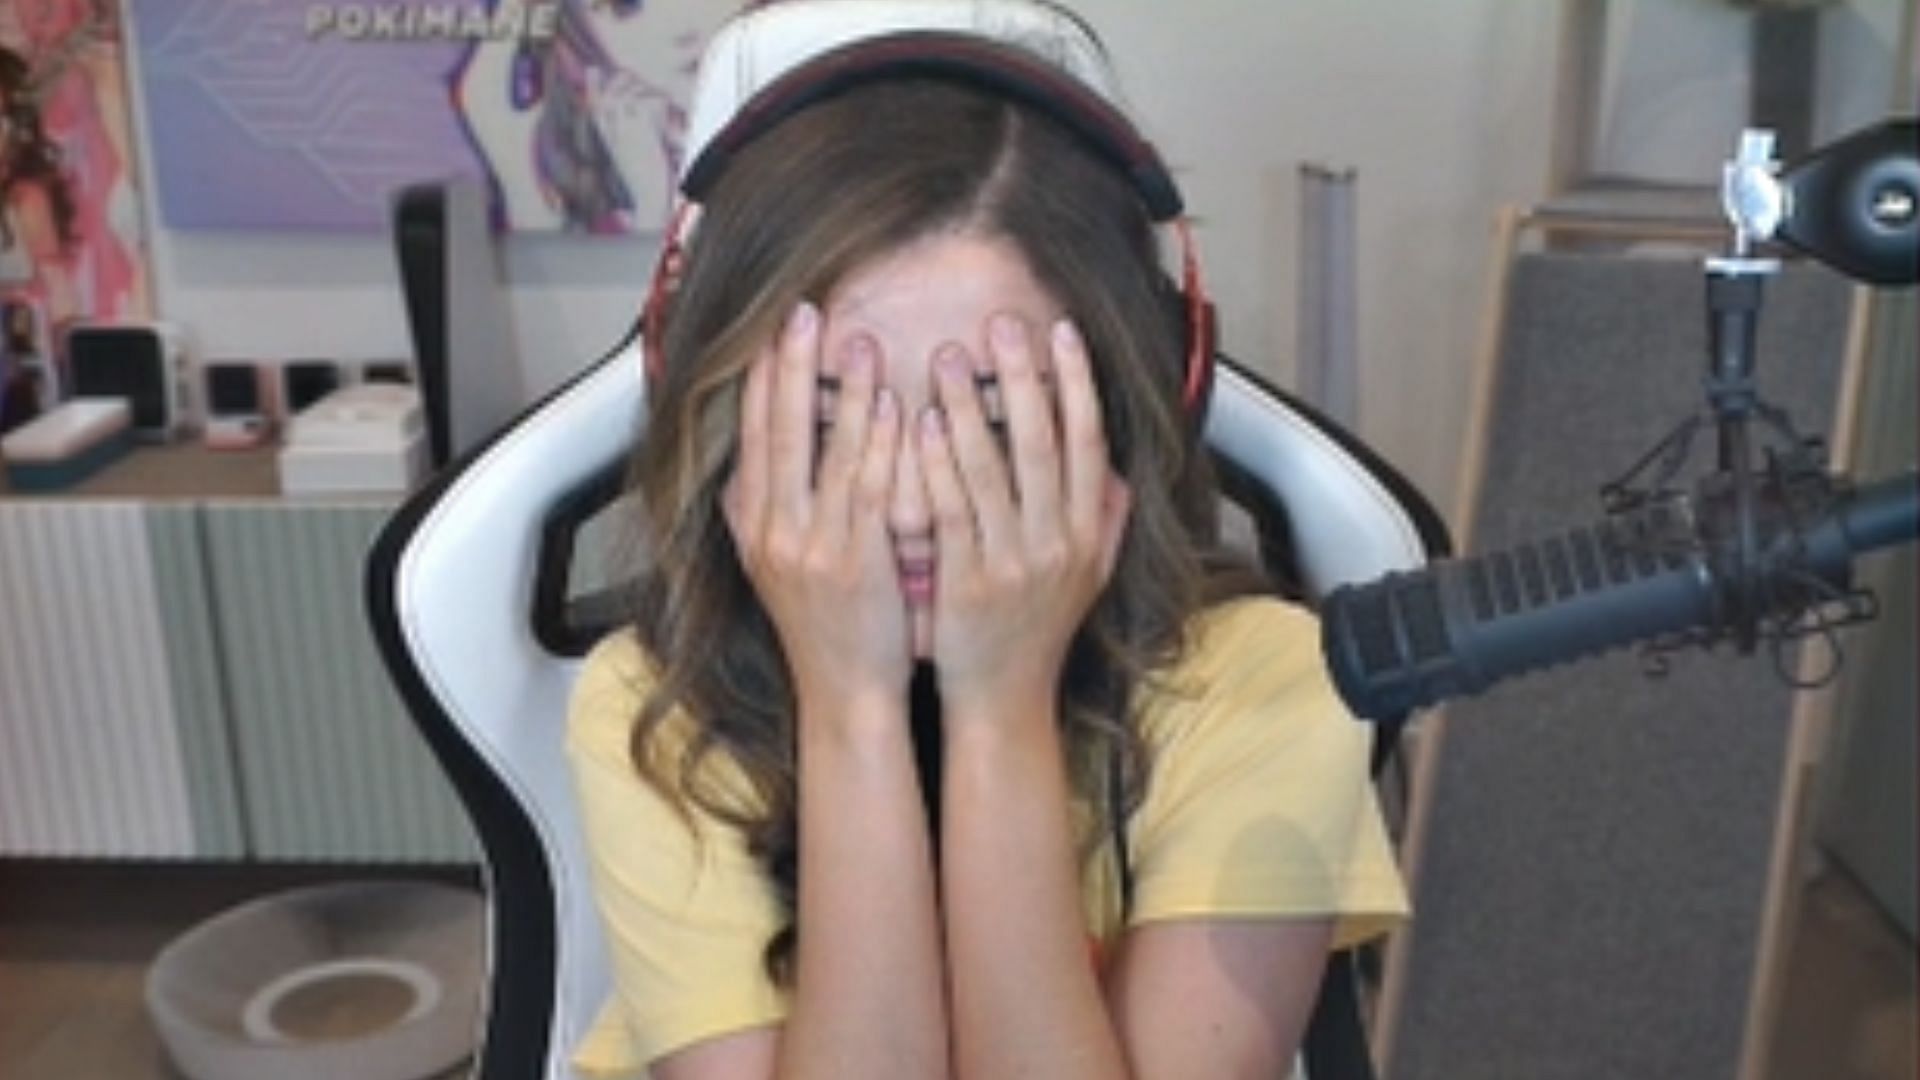 Twitch has yet to hold Pokimane accountable for her actions (image via pokimanelol/Twitch)